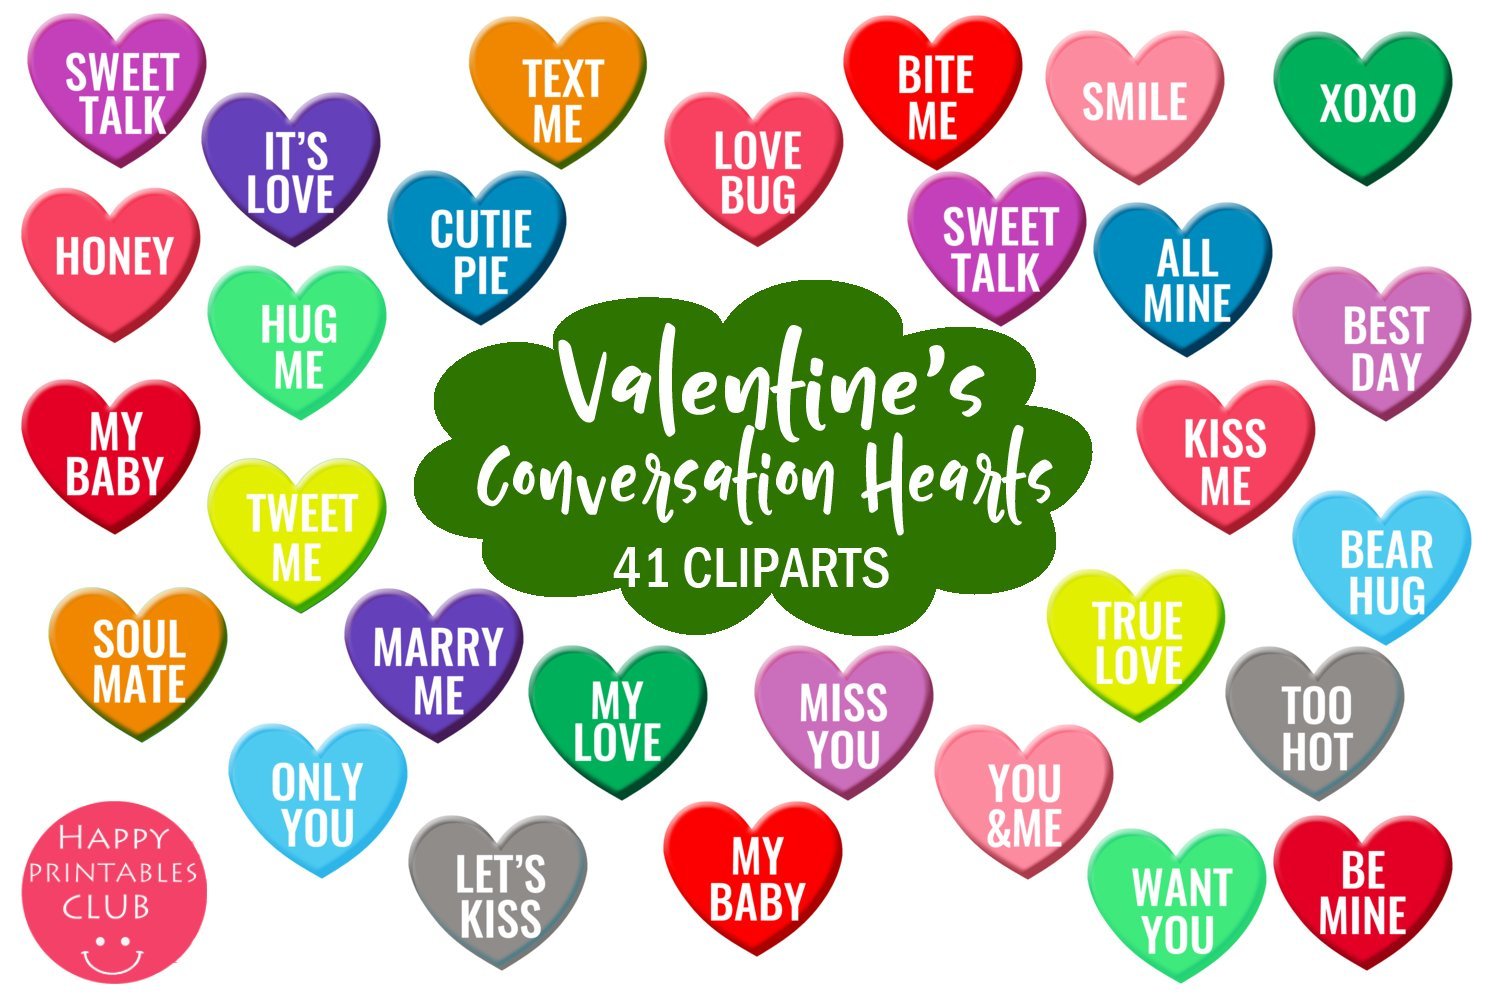 Free Conversation Hearts Clipart + SVG Cut Files - Hey, Let's Make